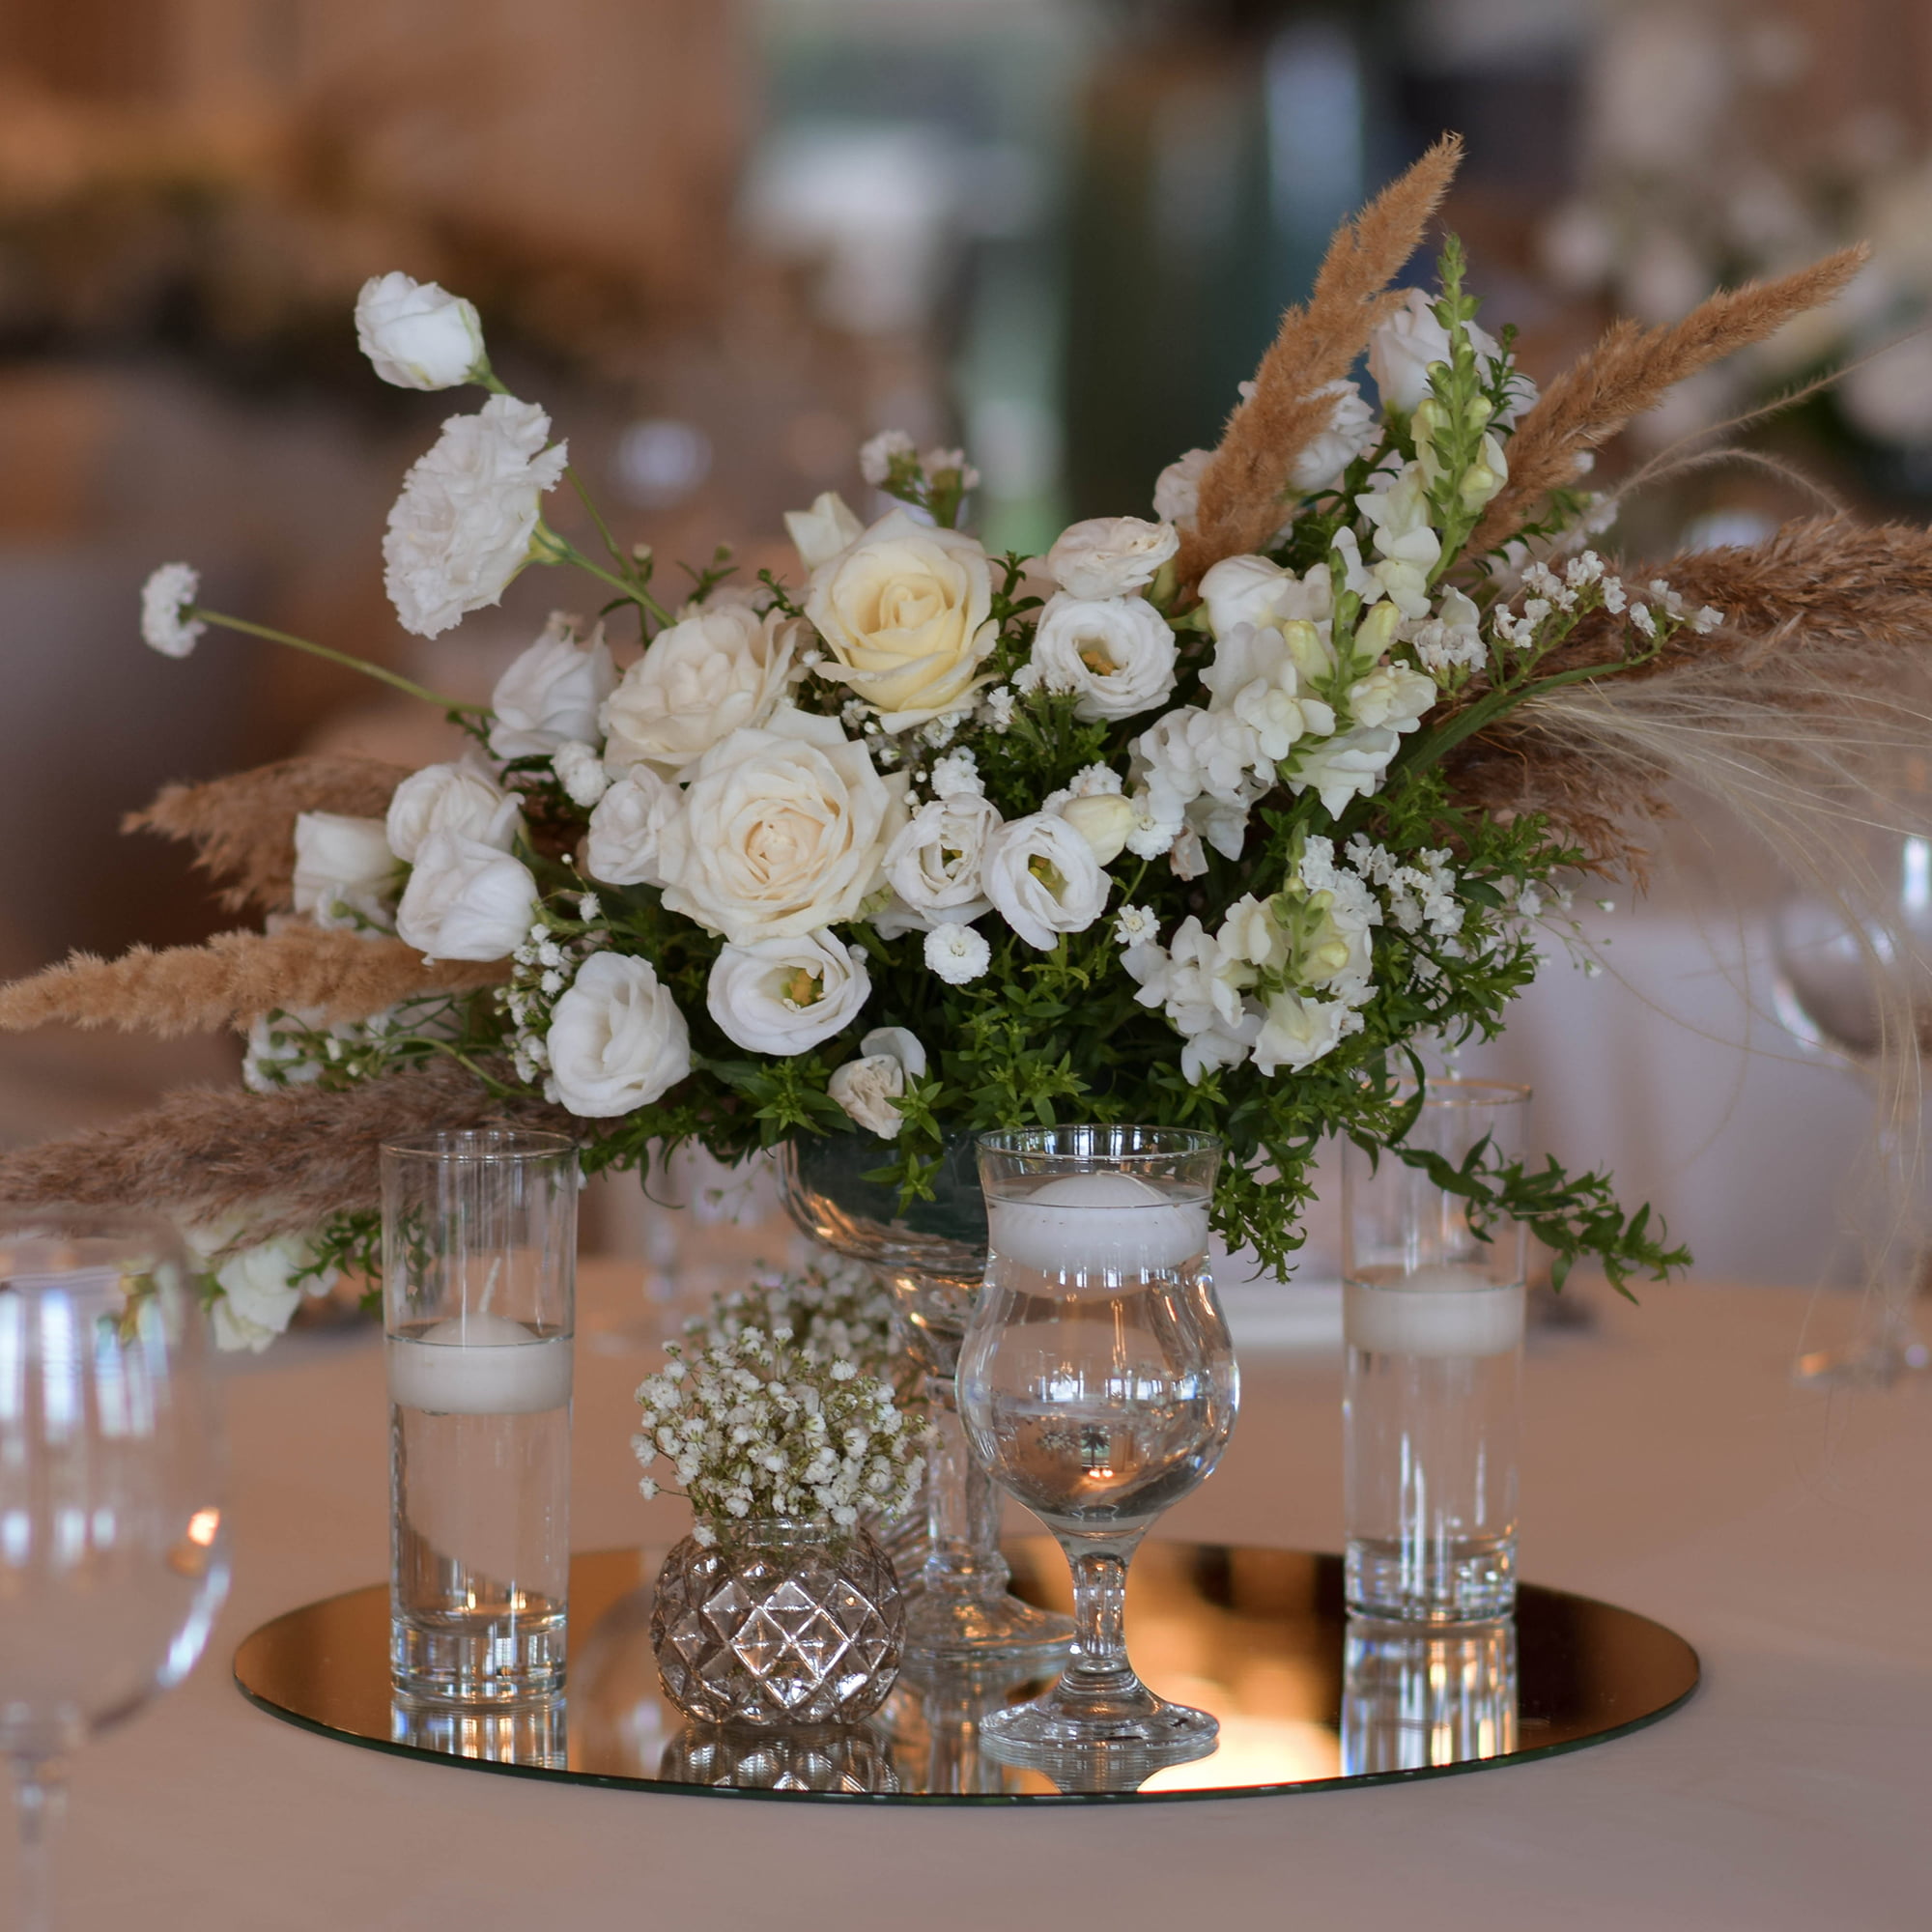 Bulk 12 pieces Round or Square Centerpiece Mirrors for Wedding